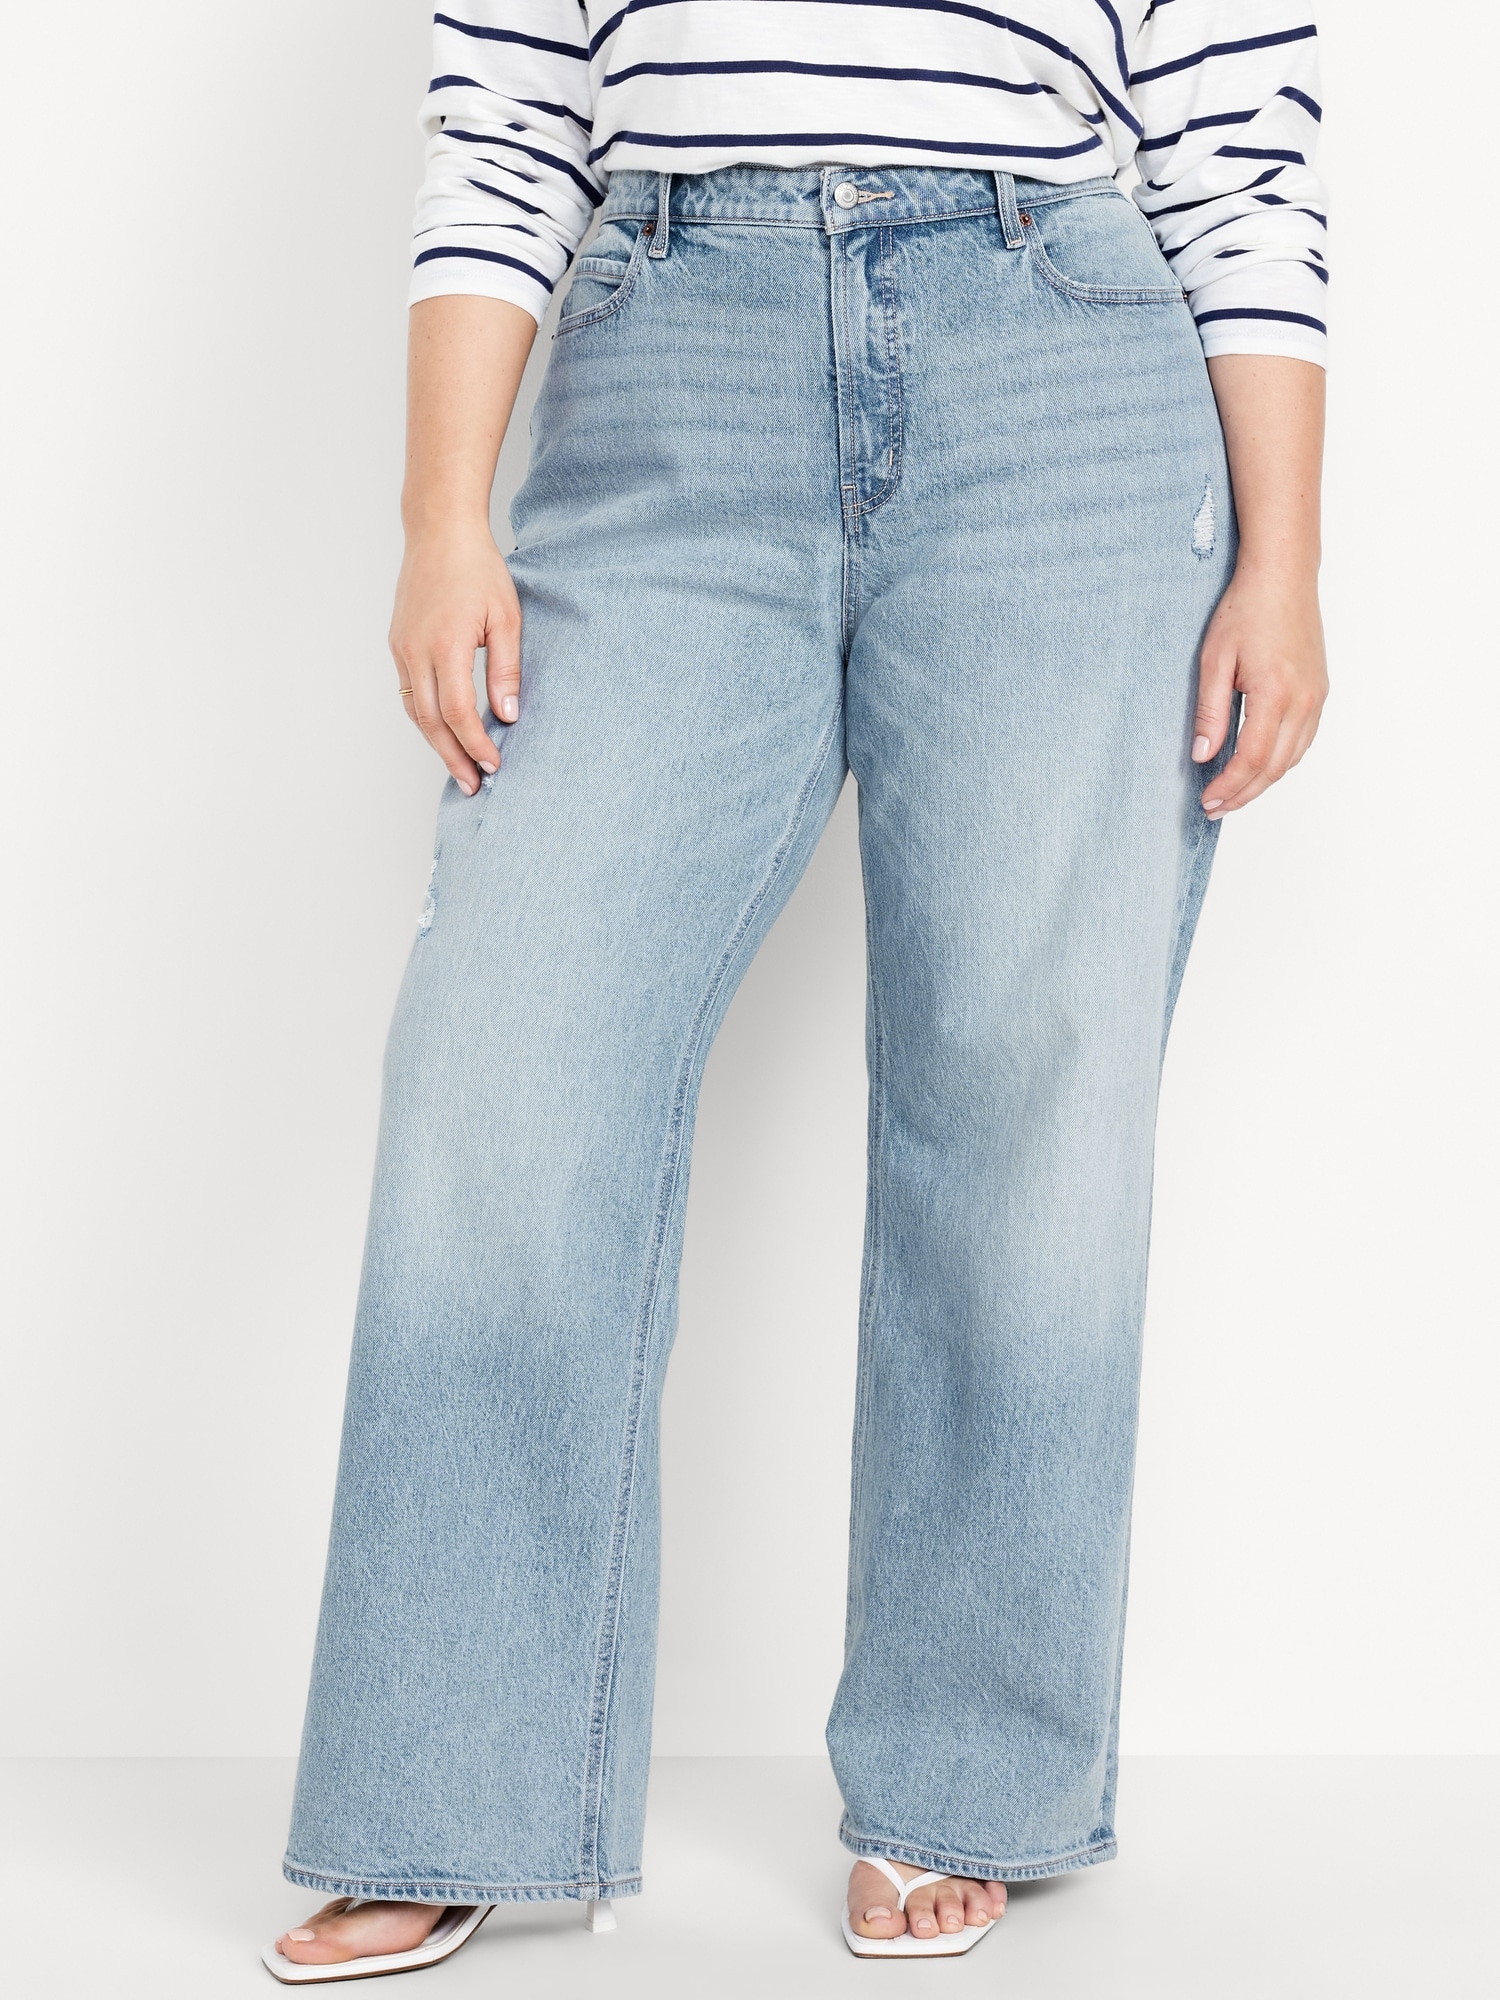 Curvy Extra High-Waisted Wide-Leg Jeans | Old Navy